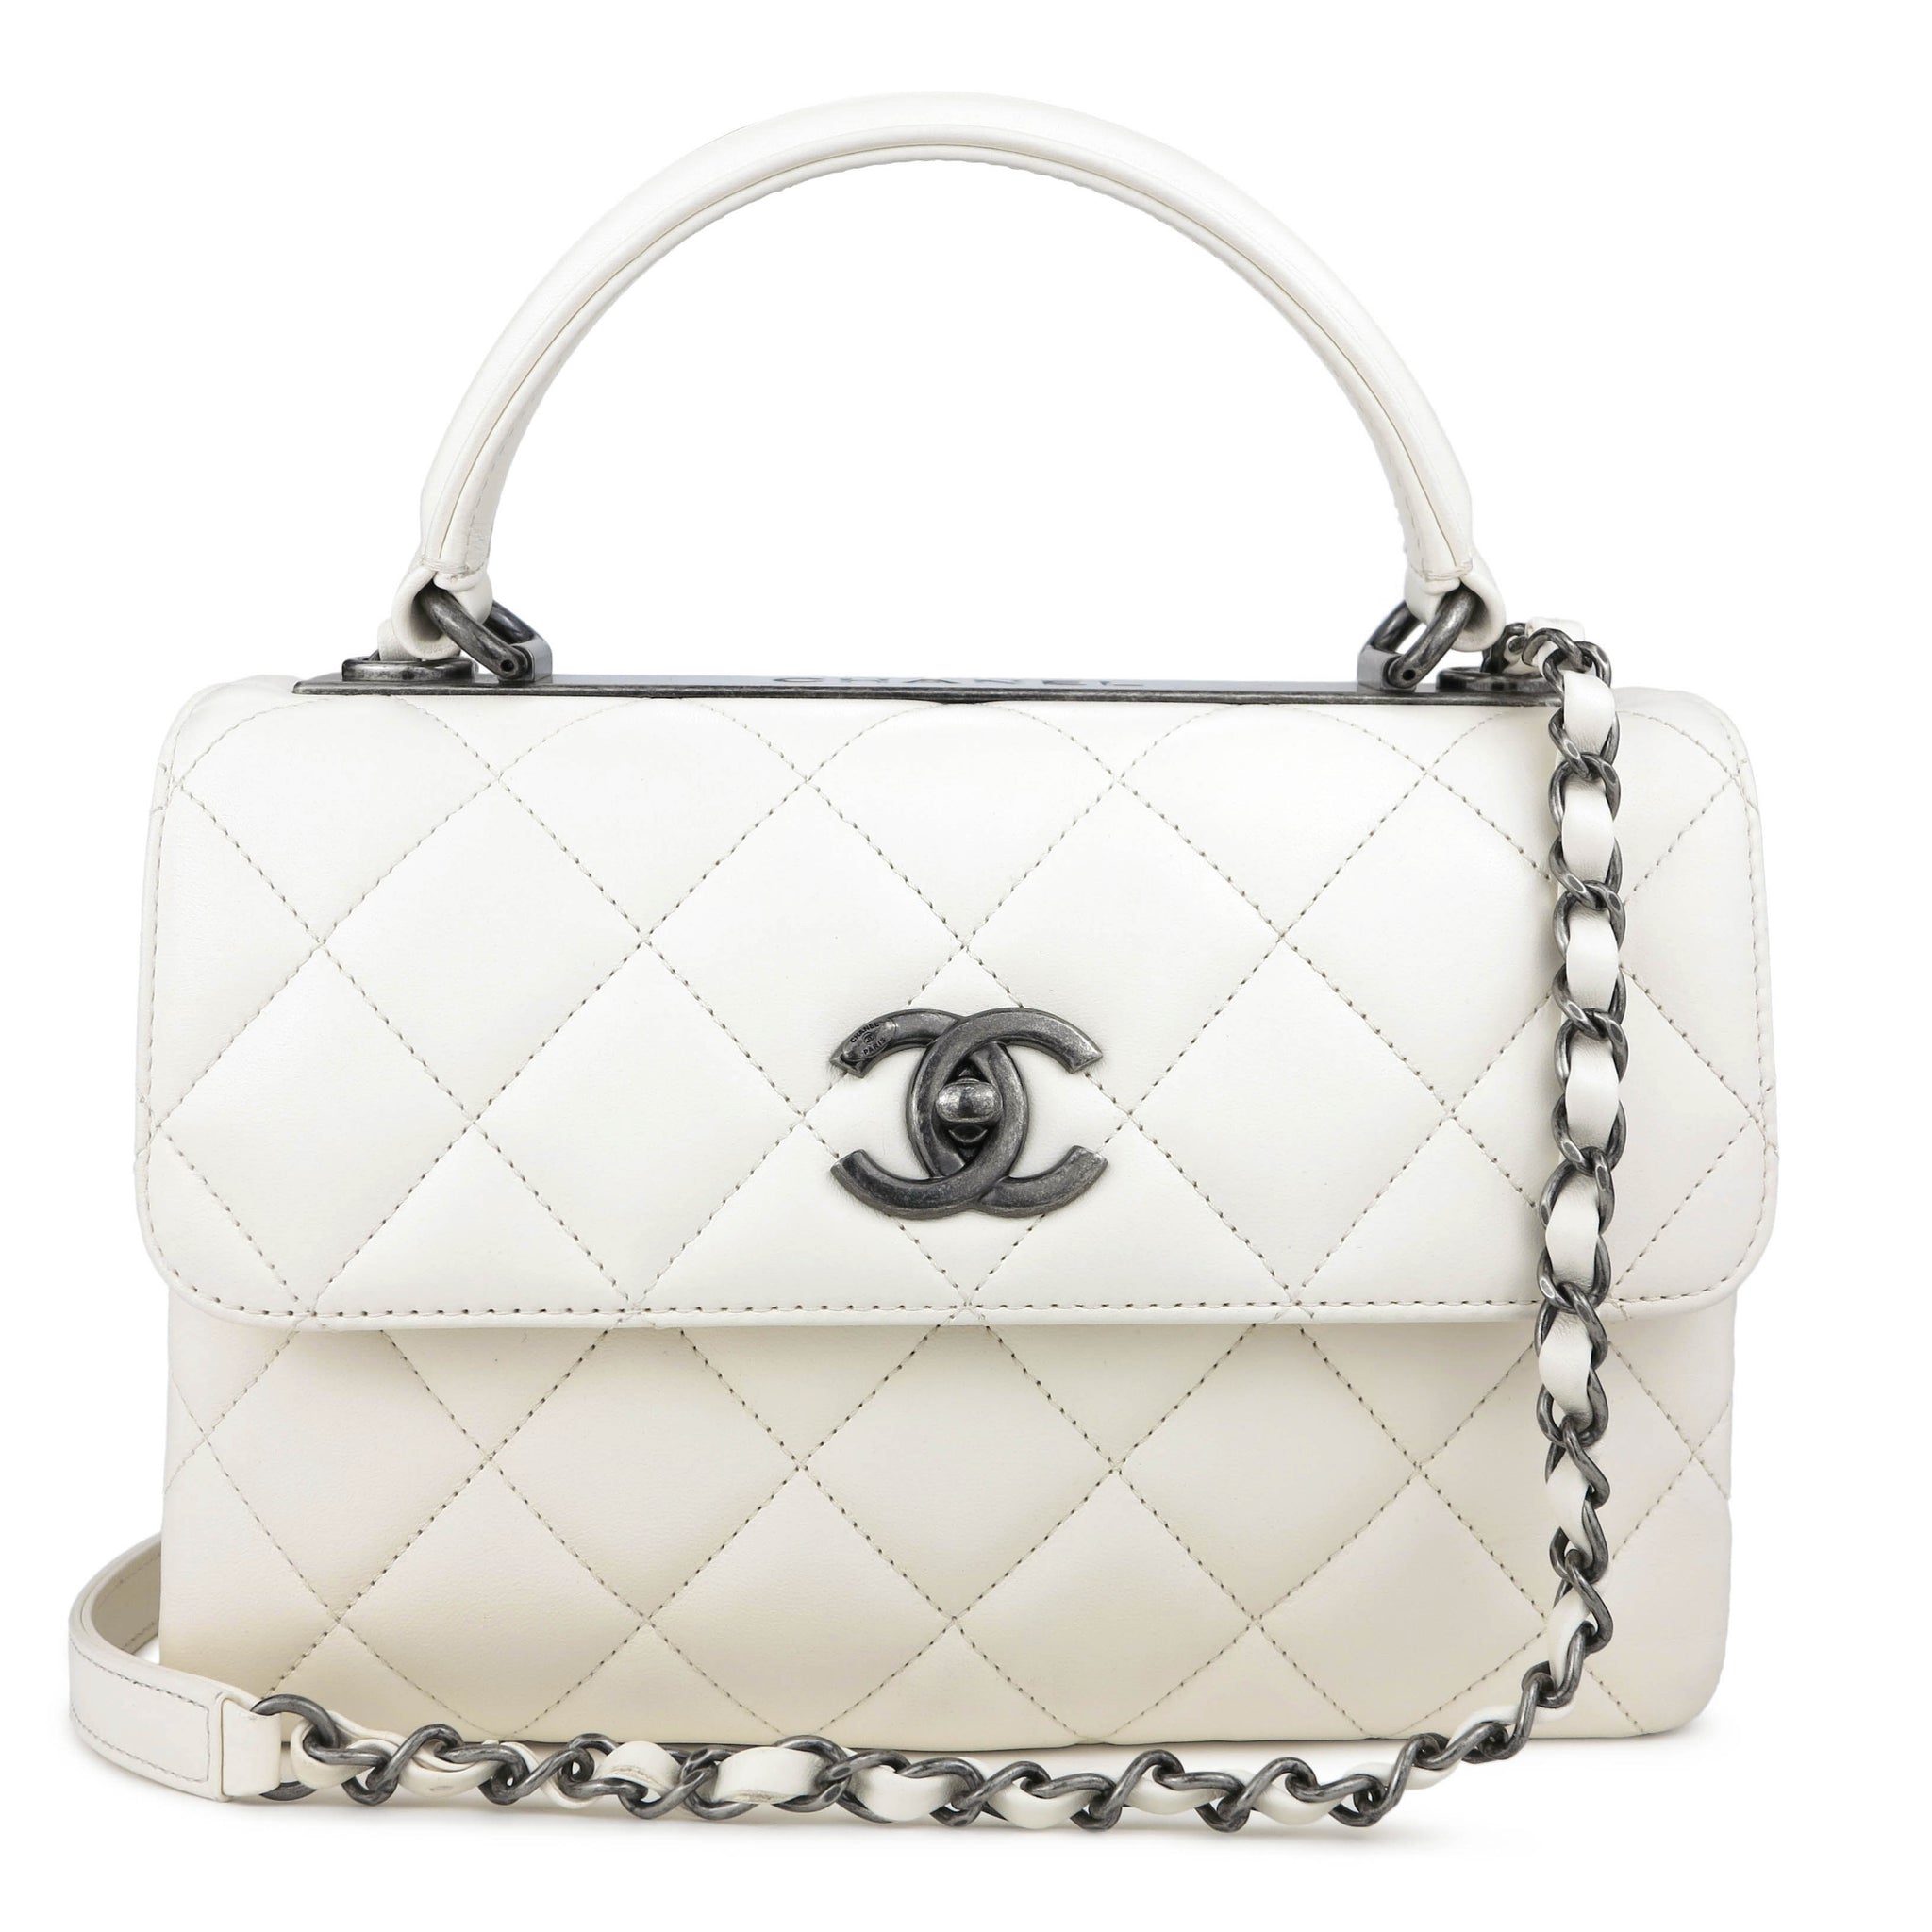 Authentic Second Hand Chanel Trendy CC Mini Flap Bag PSS03400150  THE  FIFTH COLLECTION